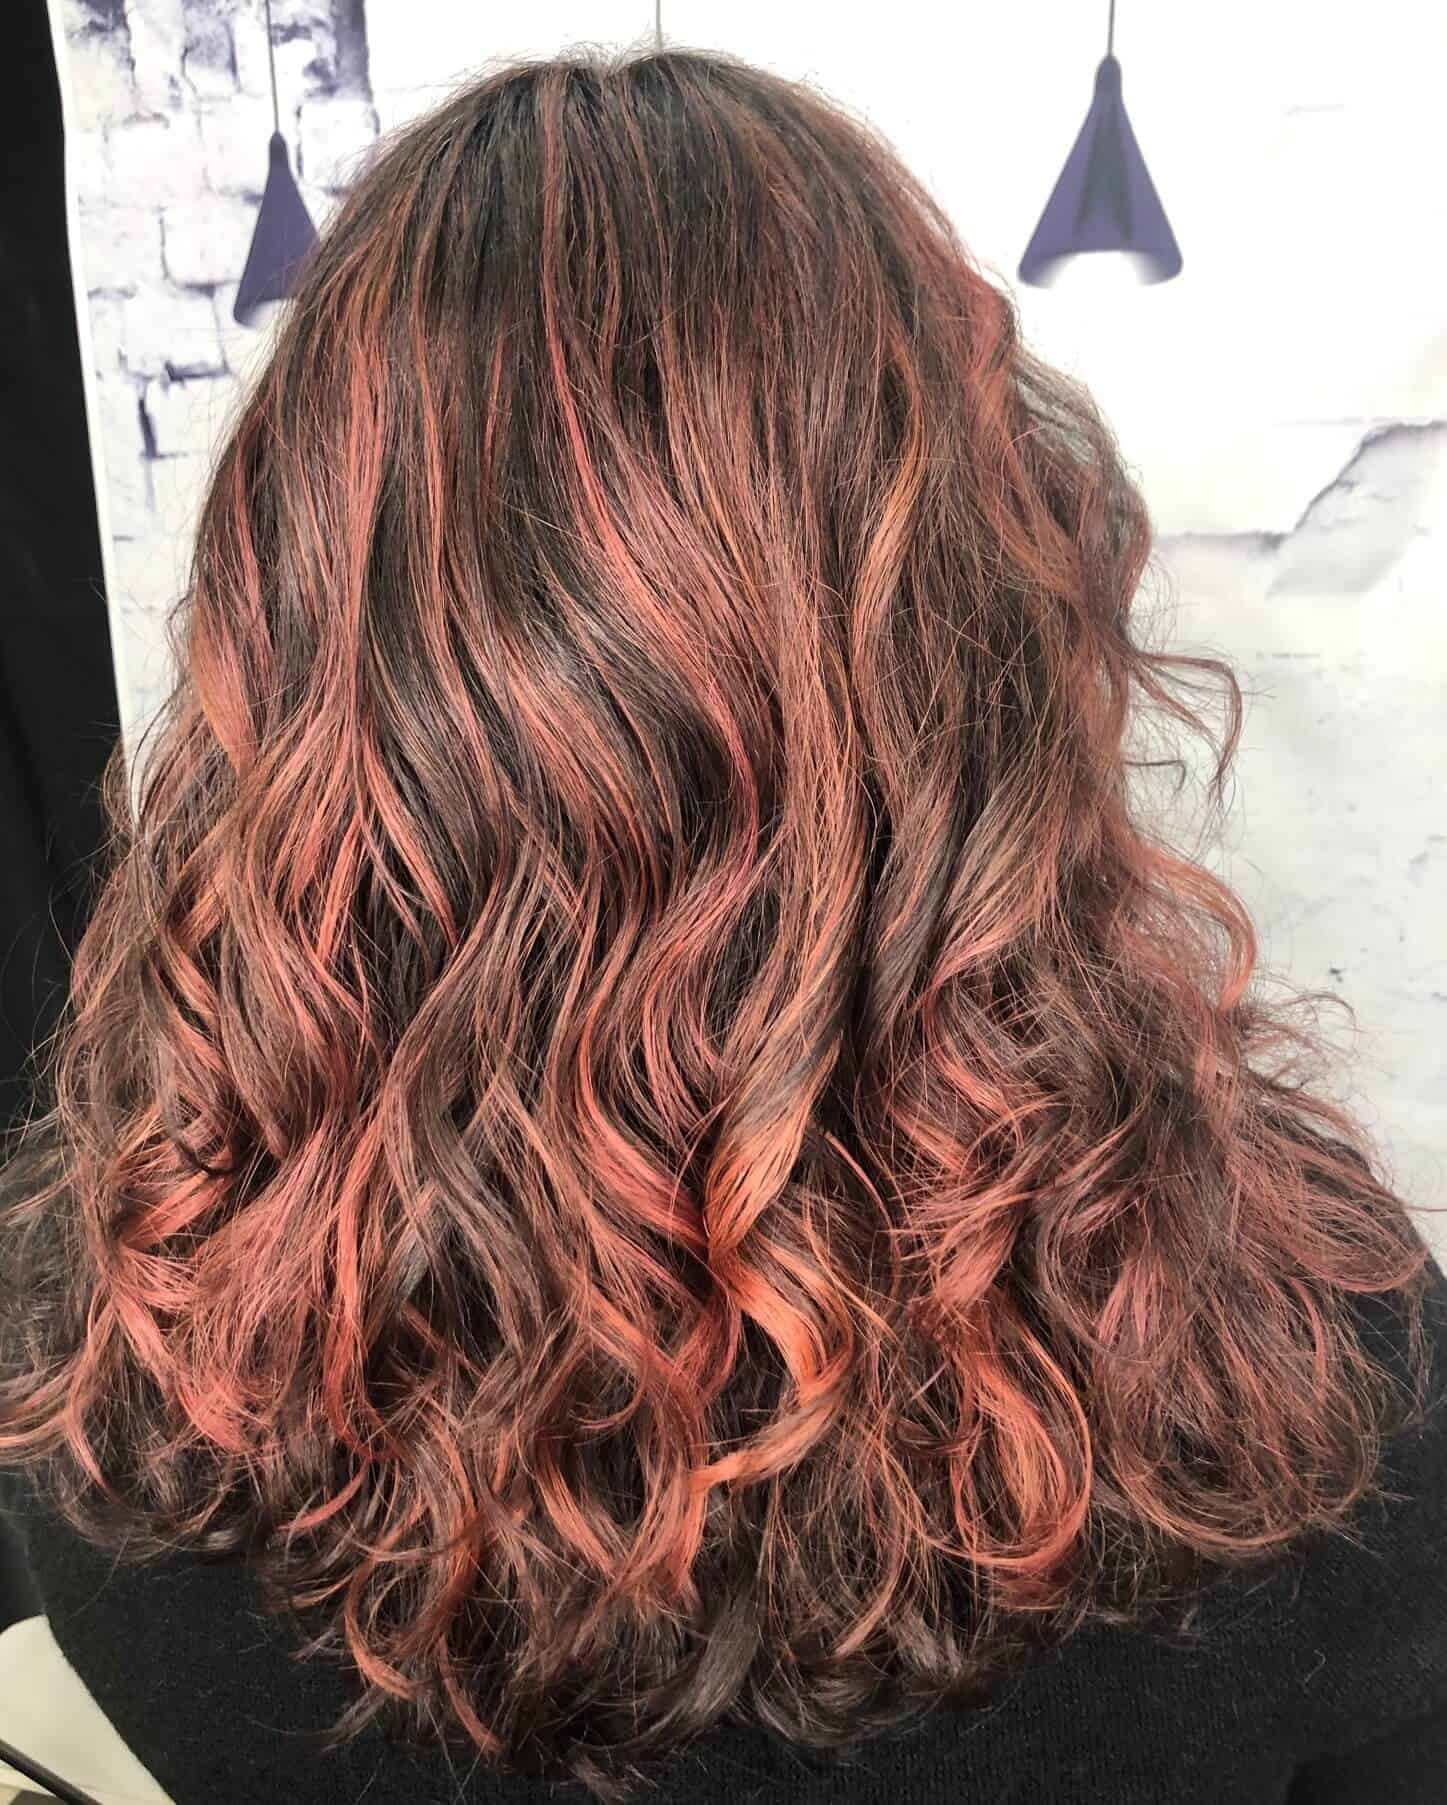 Rose Gold Hair Color Images | Pilorum Salon and Spa